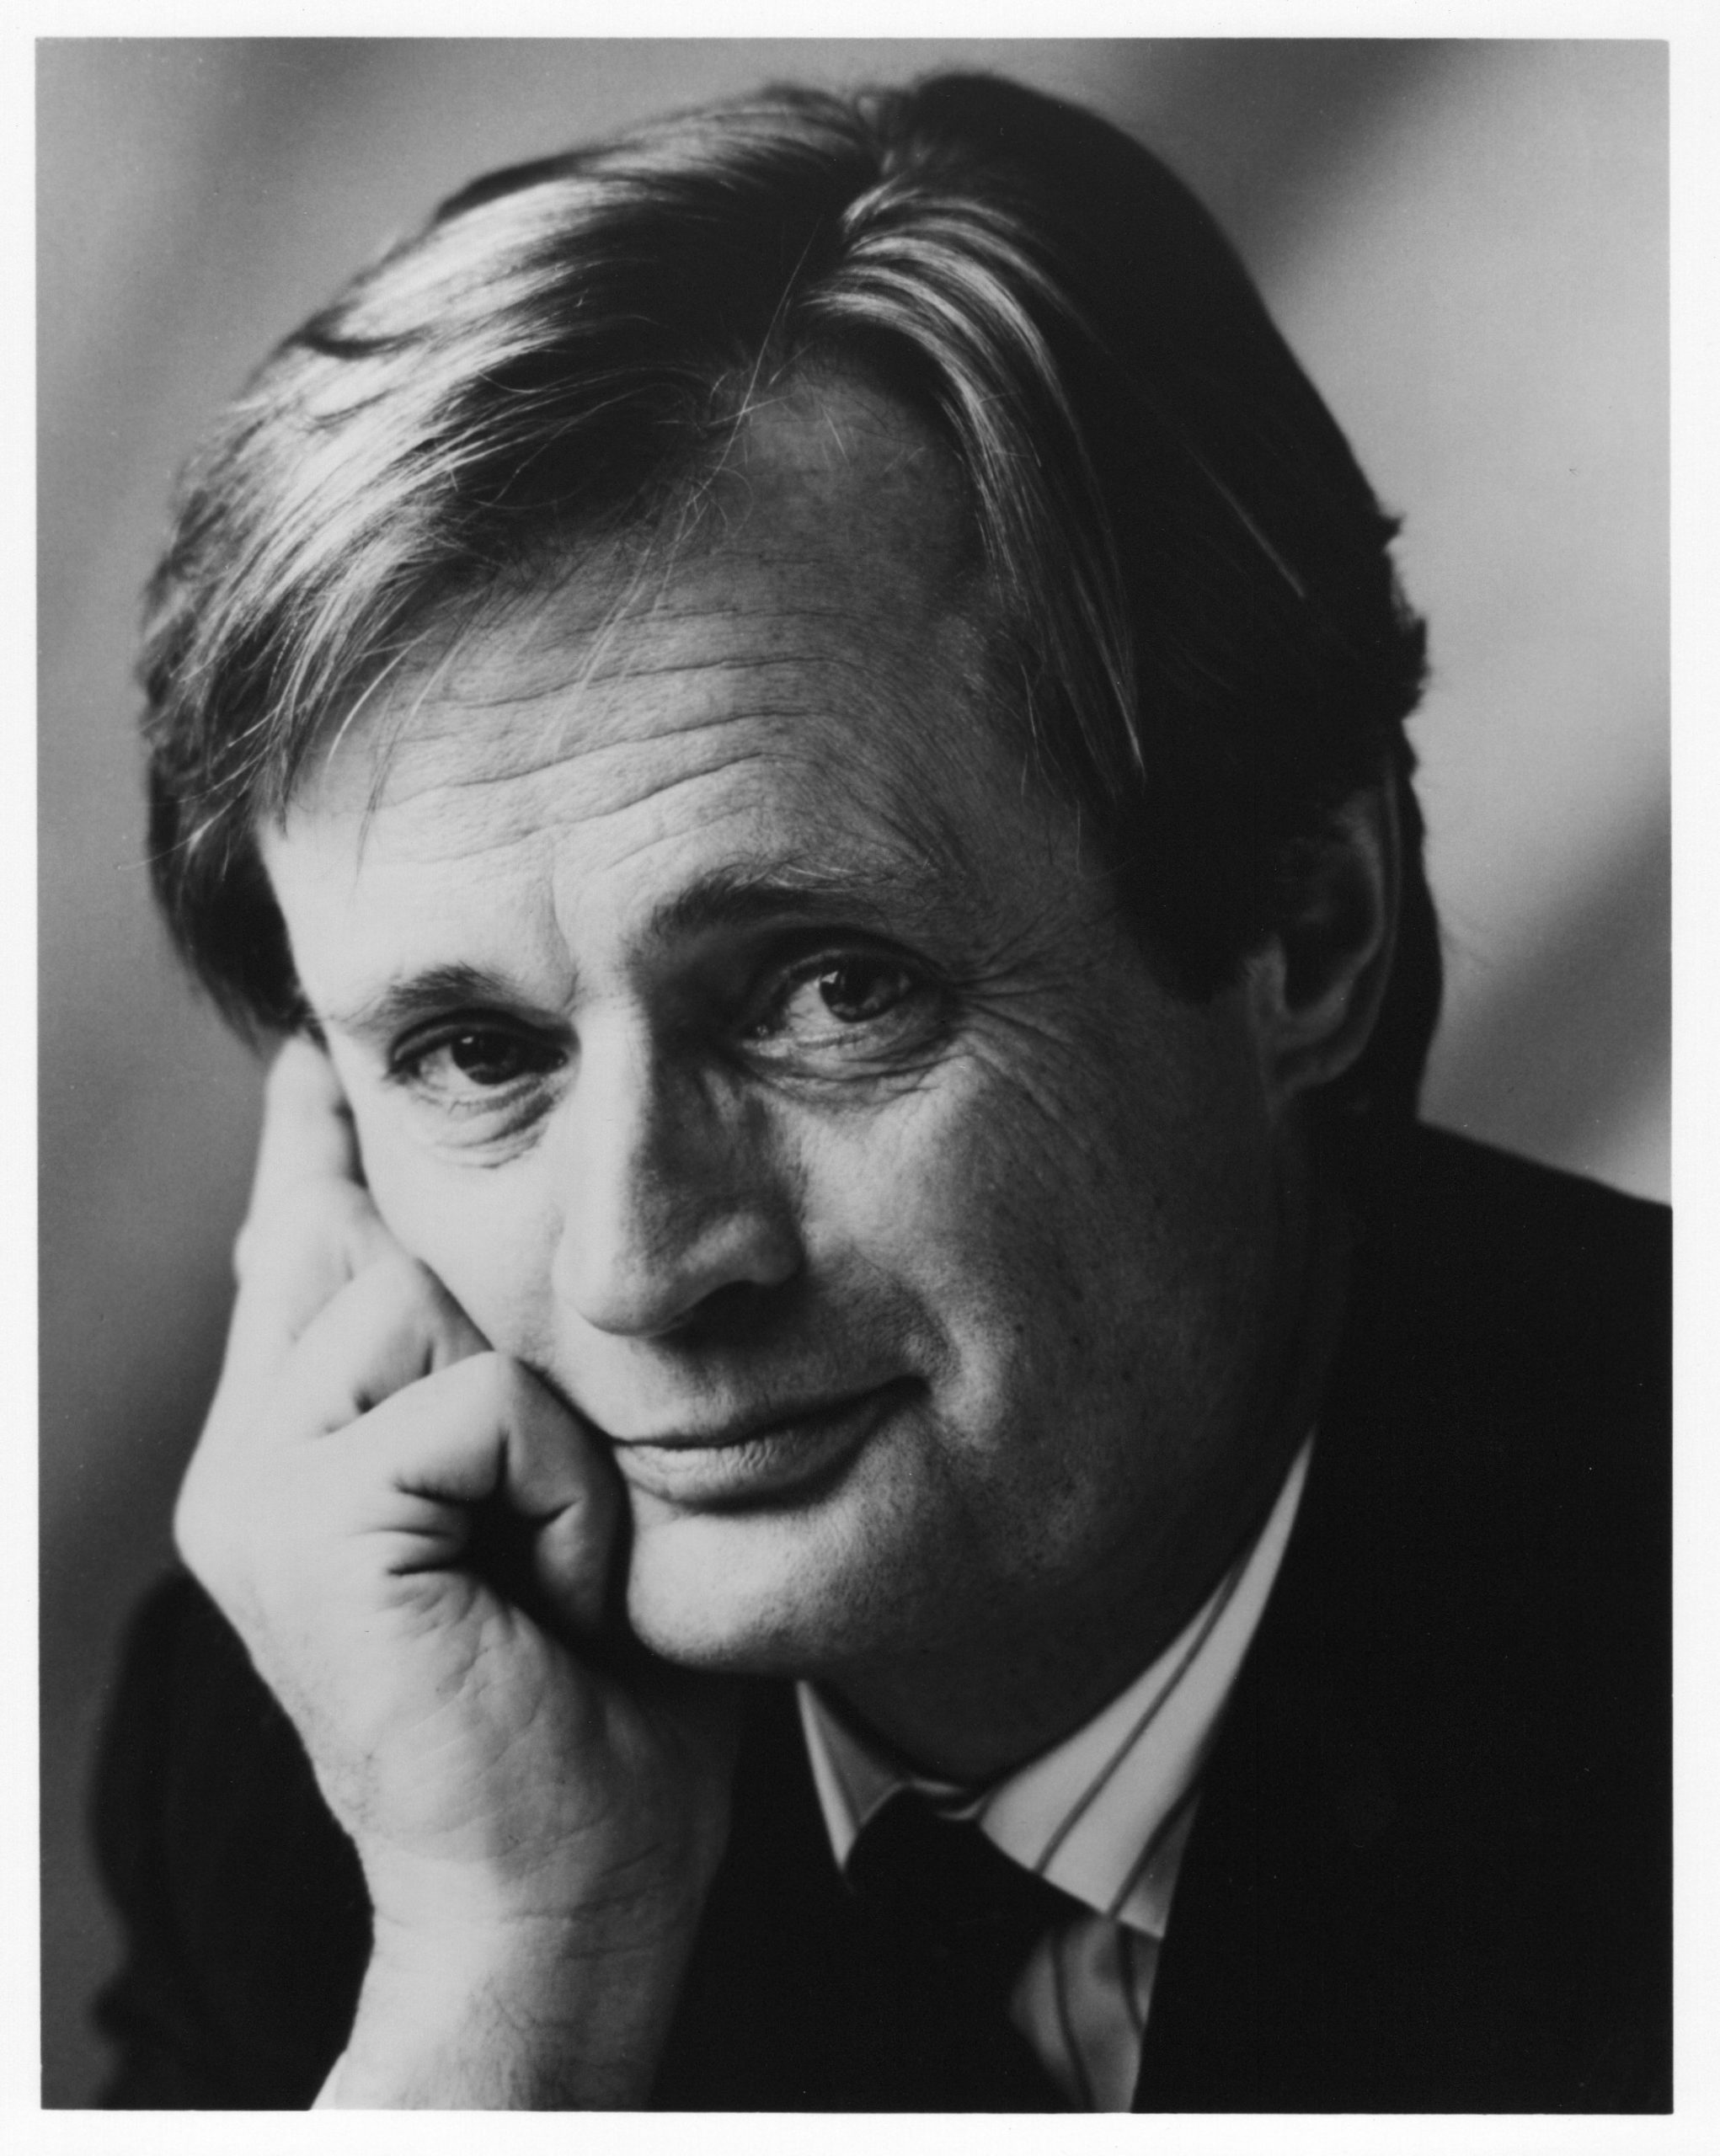 NCIS star David McCallum looks back on a career which is still going